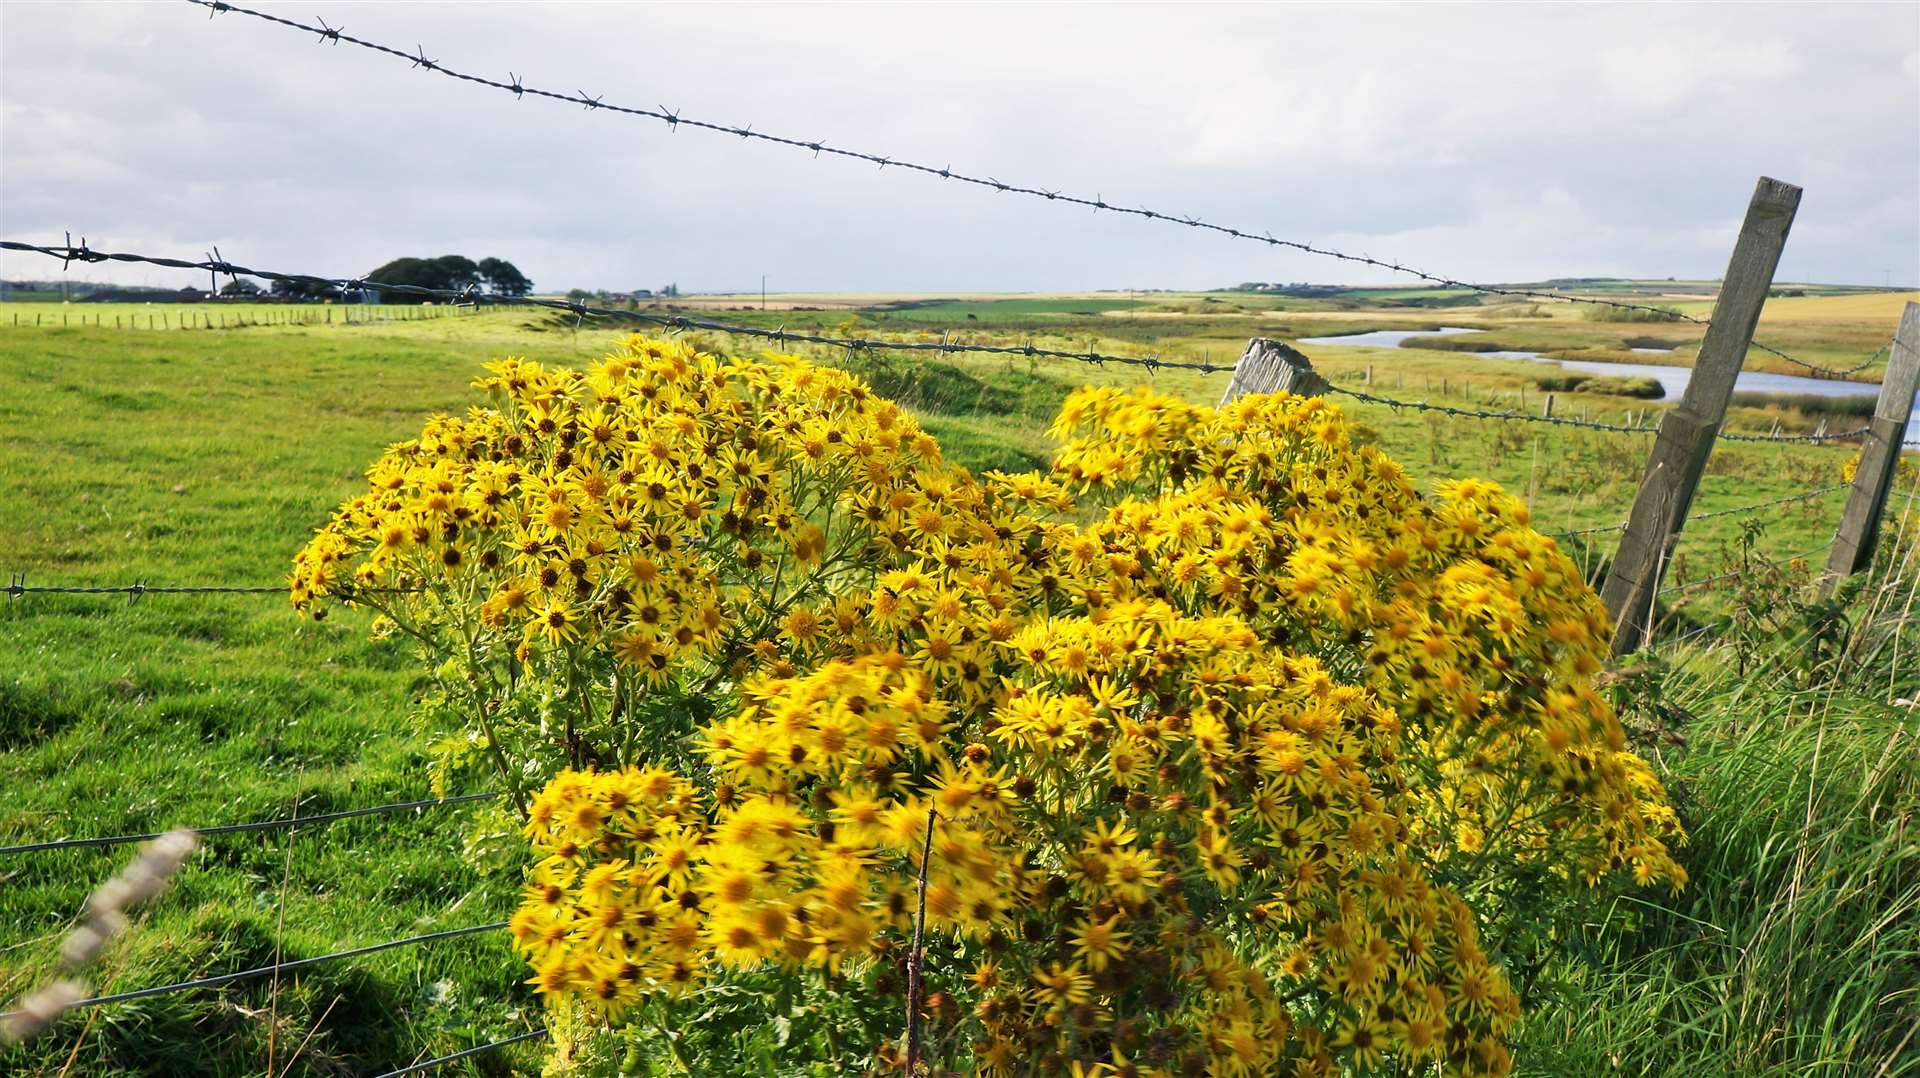 Ragwort has been seen in ever increasing numbers across Caithness. Picture: DGS